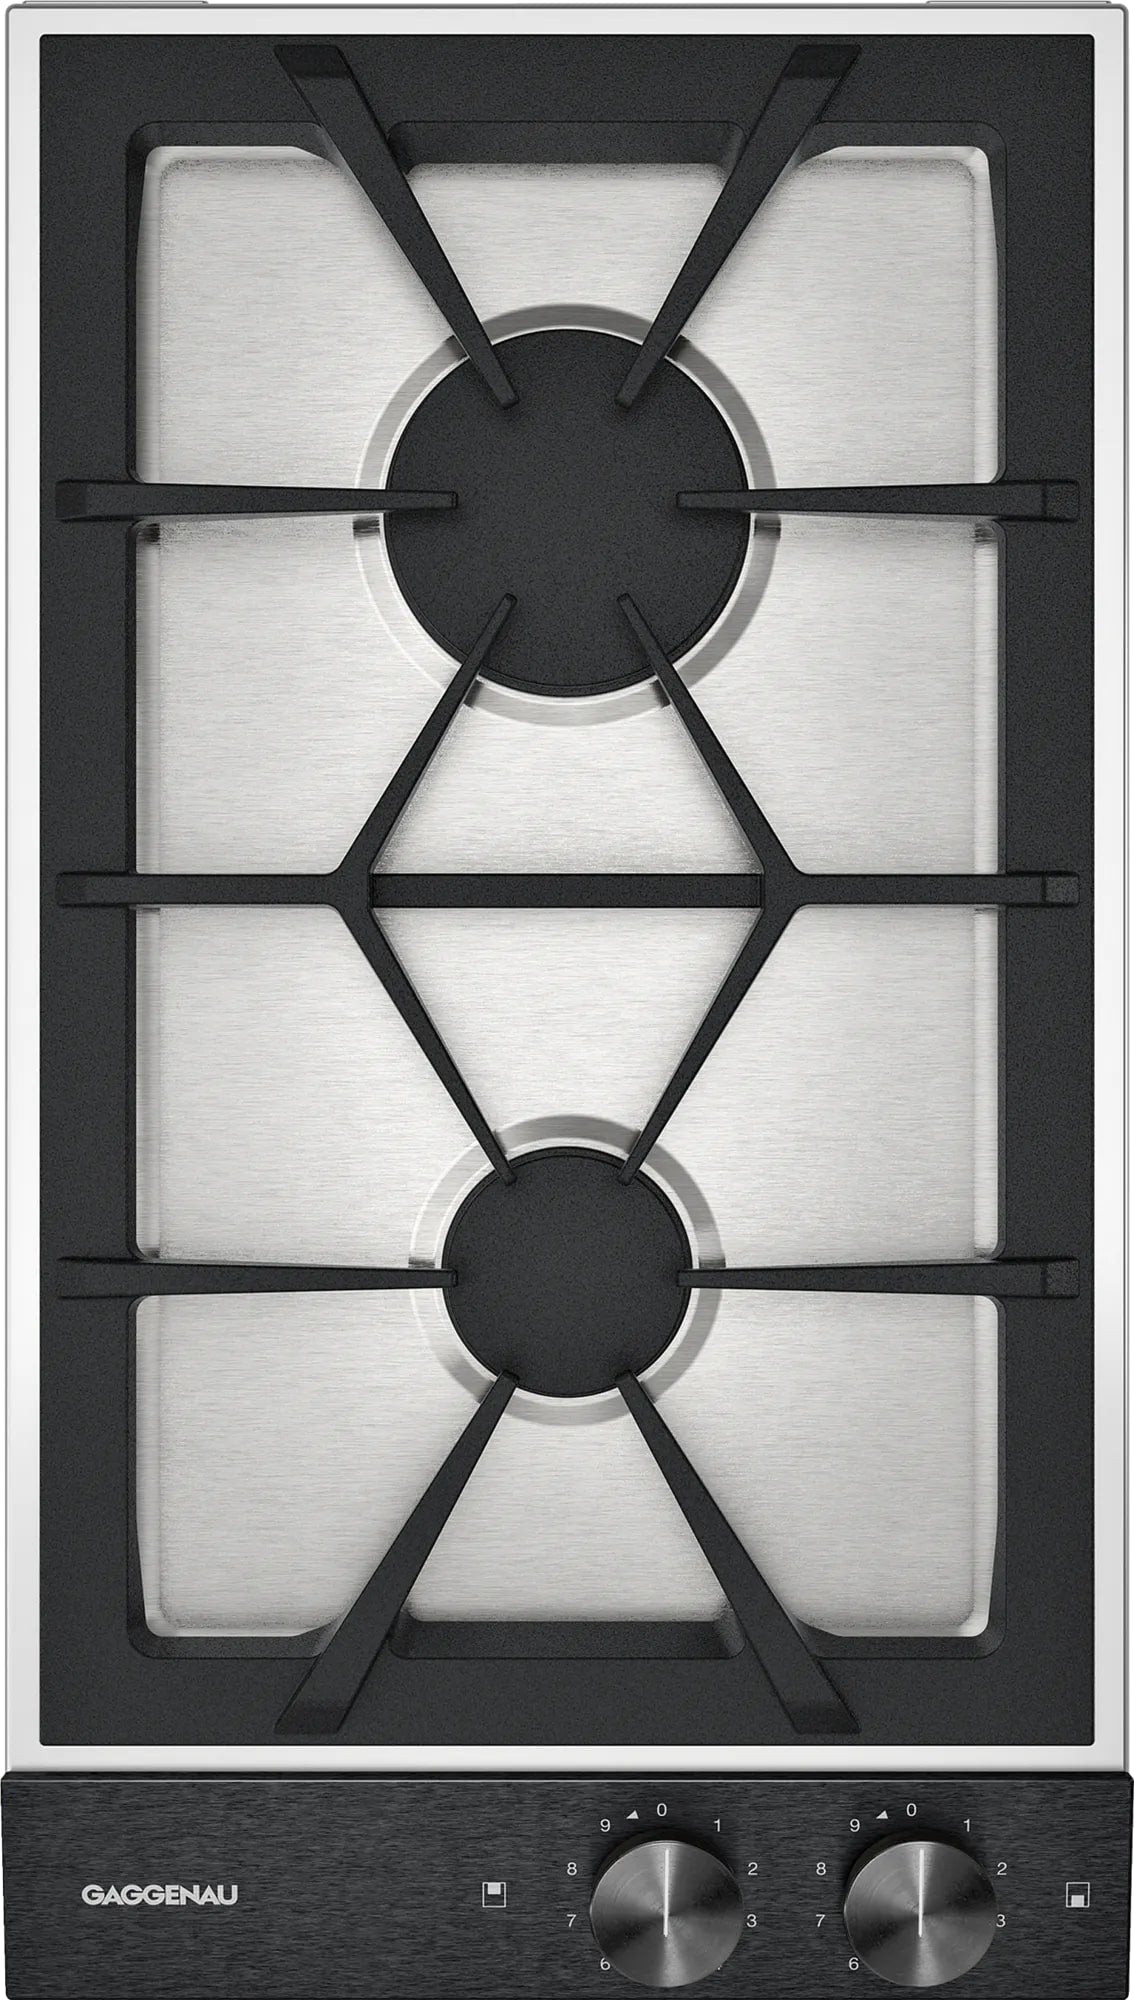 Gaggenau - 11.3125 inch wide Gas Cooktop in Stainless - VG232220CA